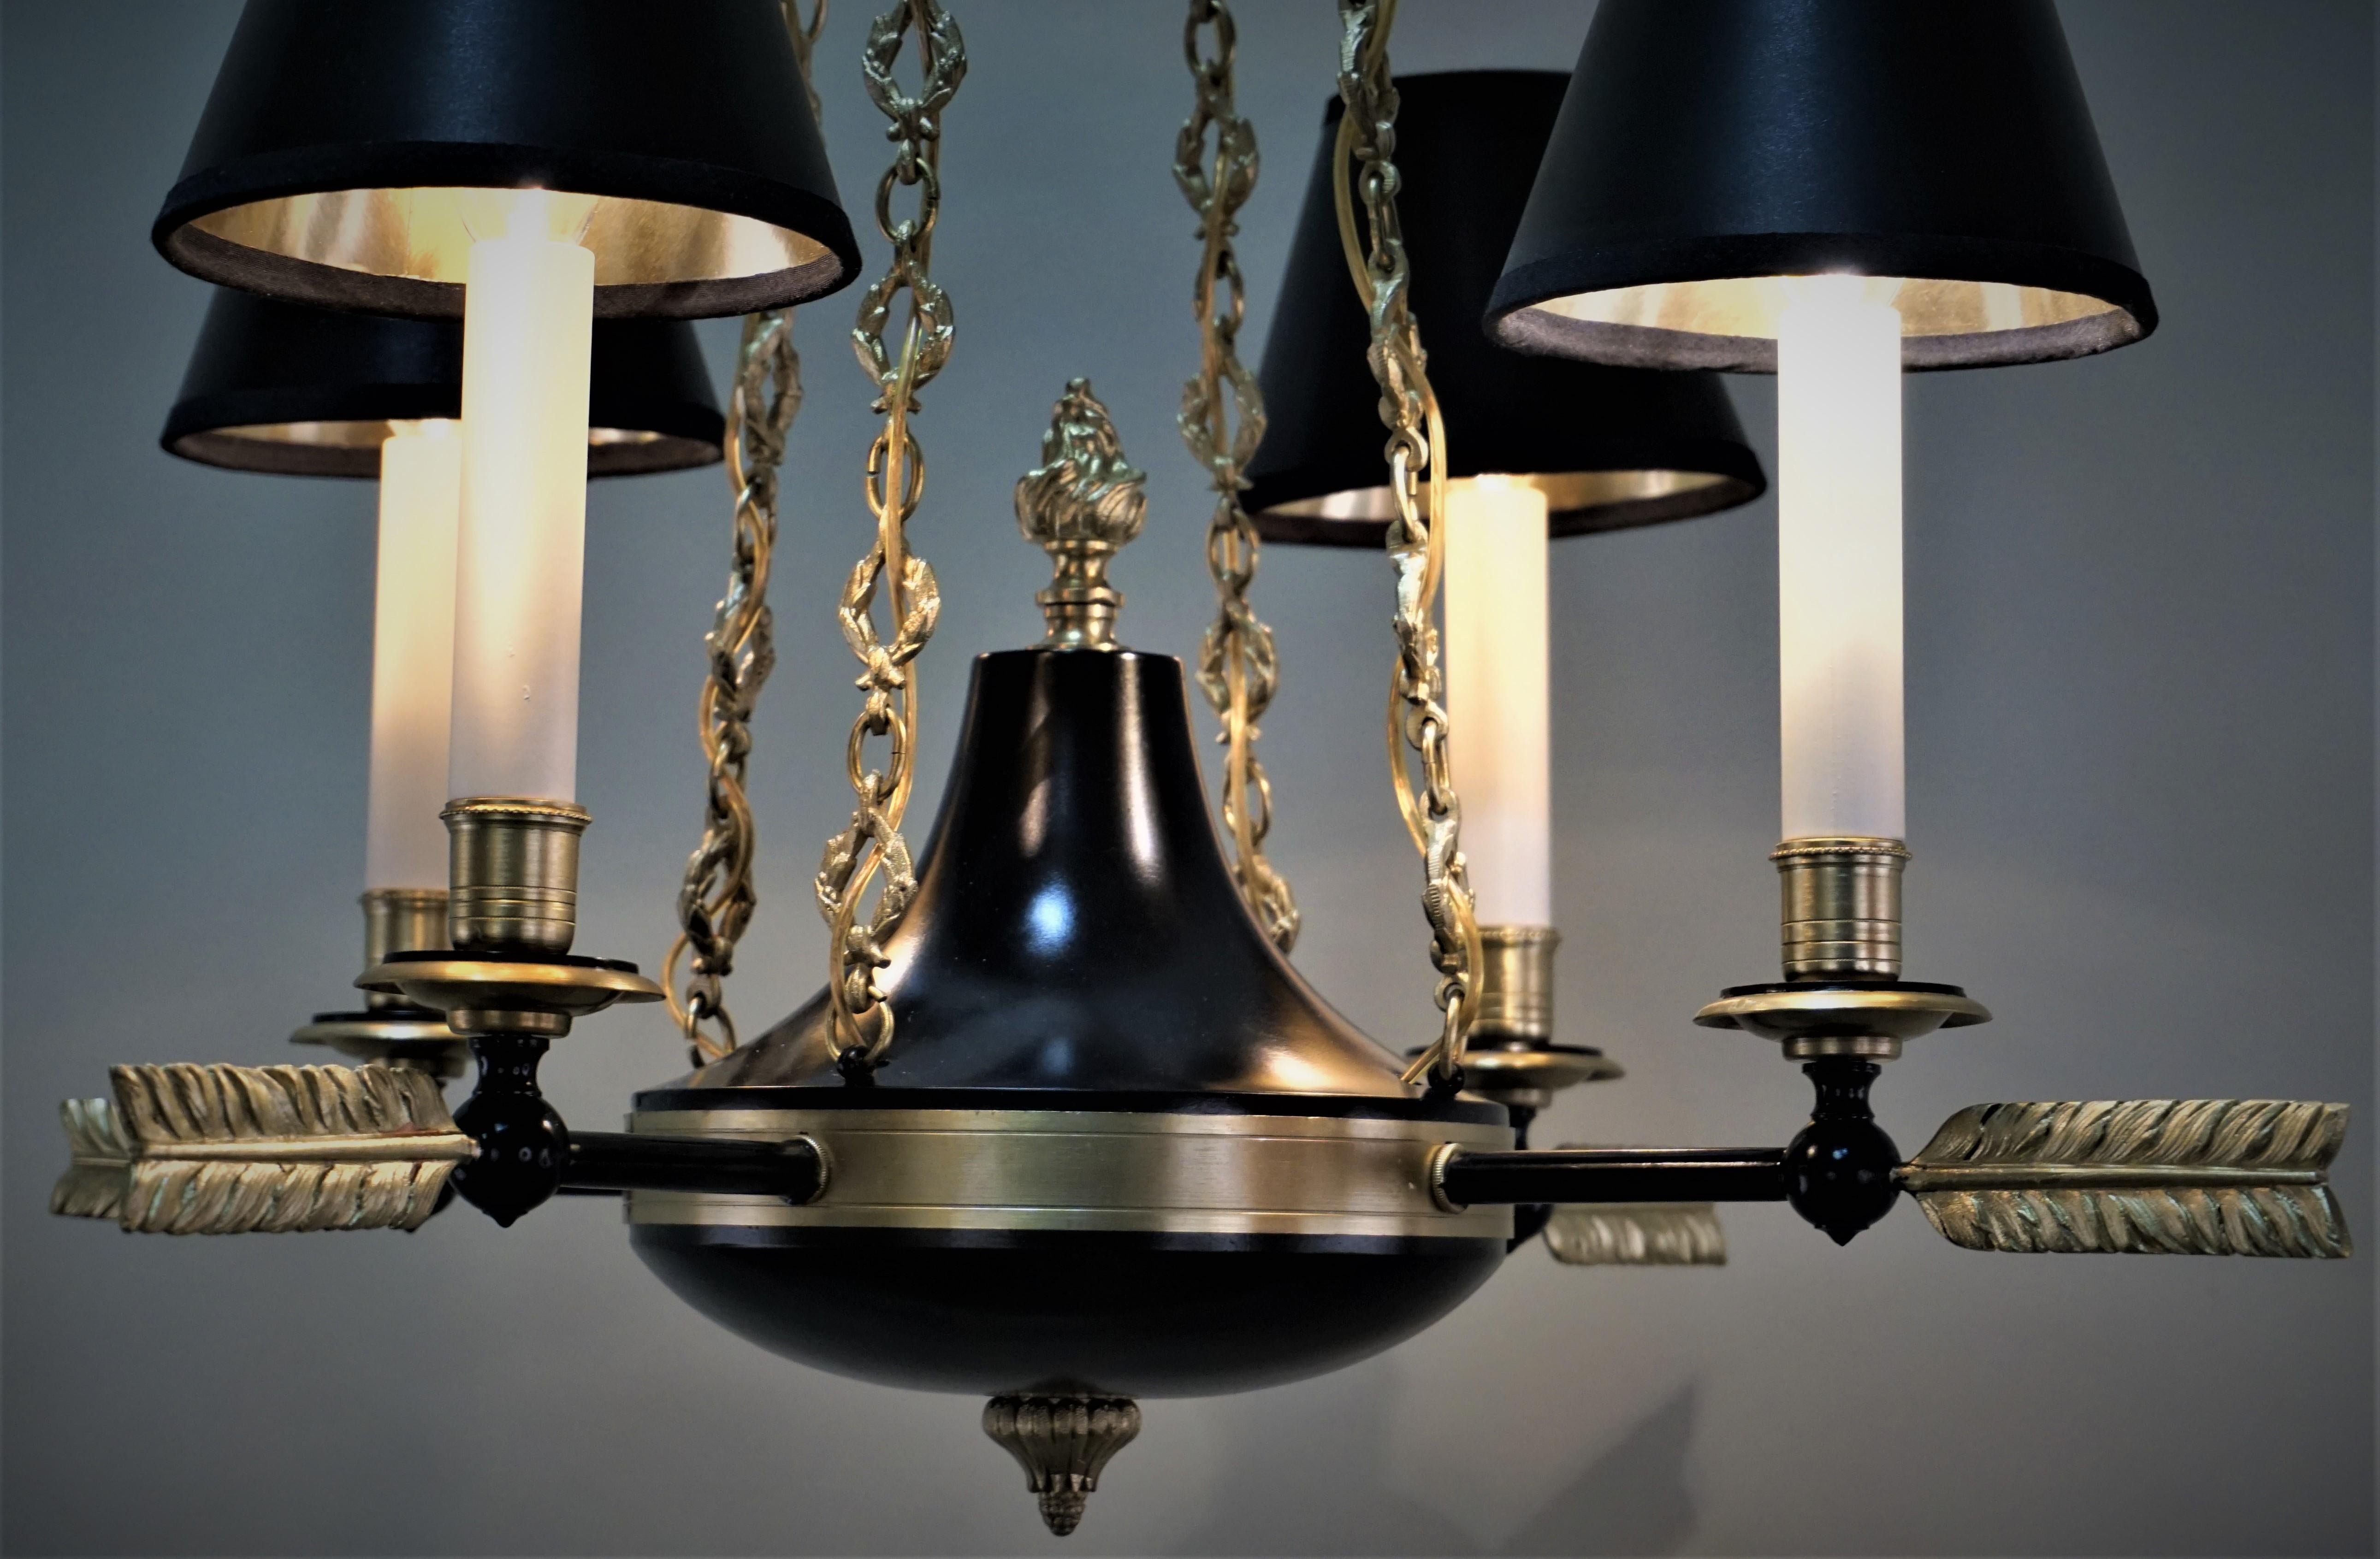 French Empire style four-light bronze and black lacquer finished chandelier.